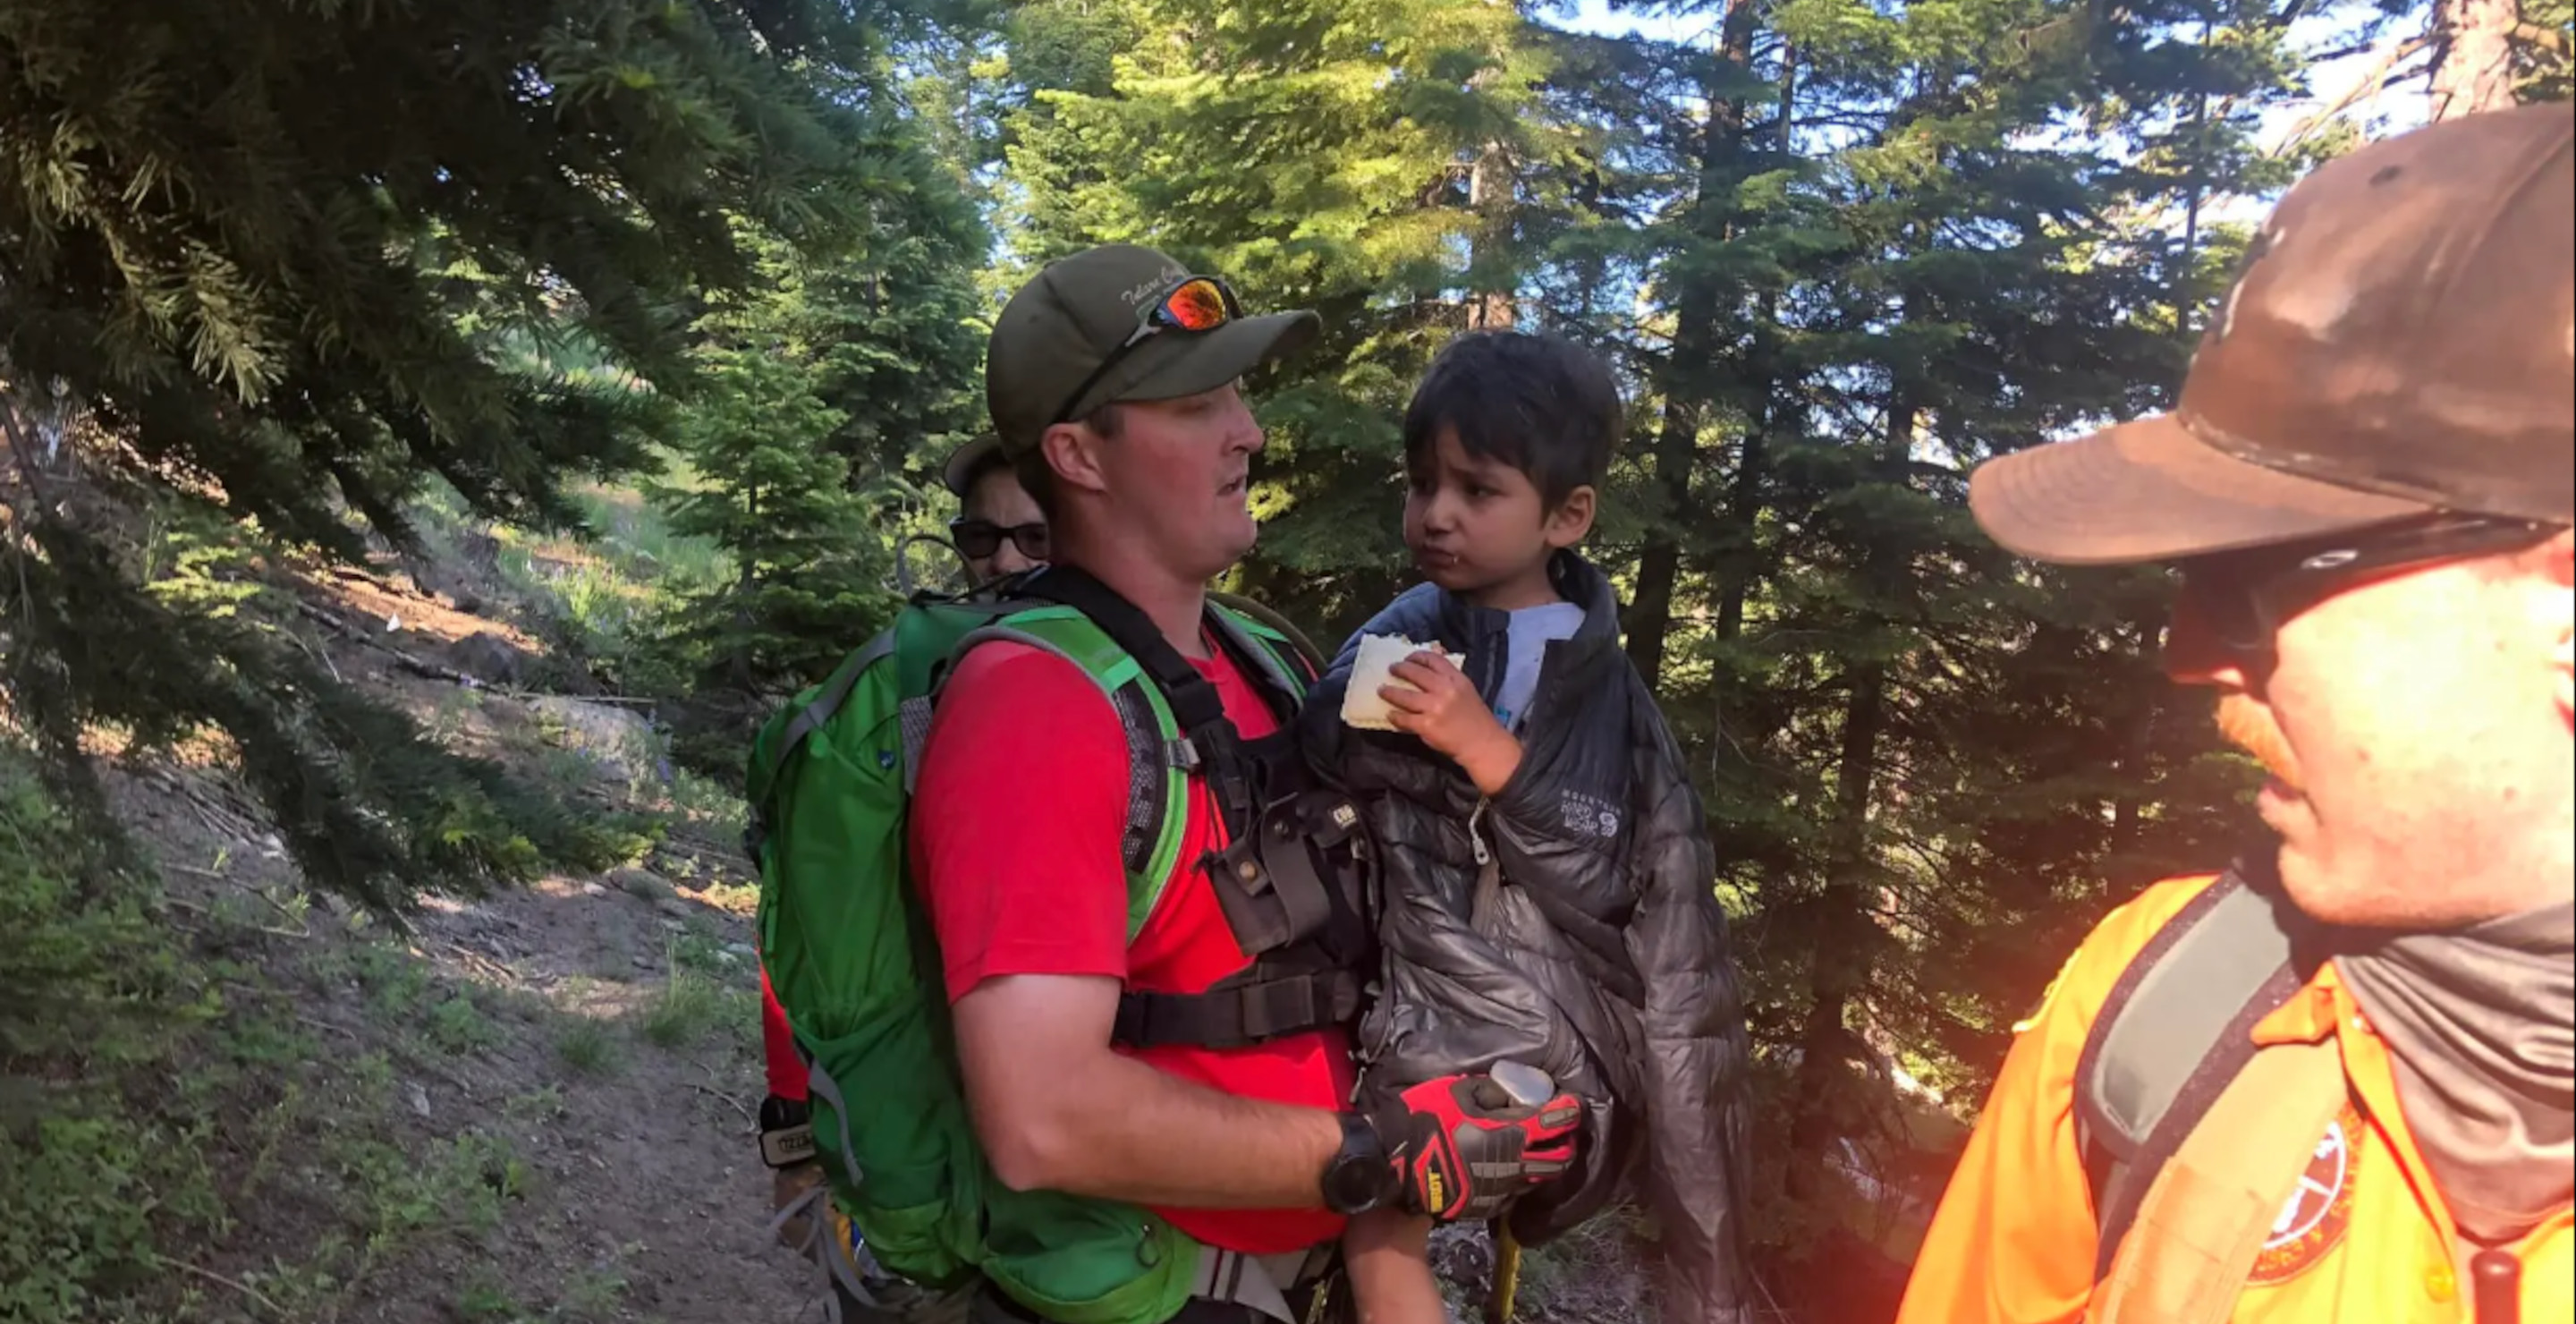 California Four-Year-Old Found Safely After Spending Day Alone In The Woods